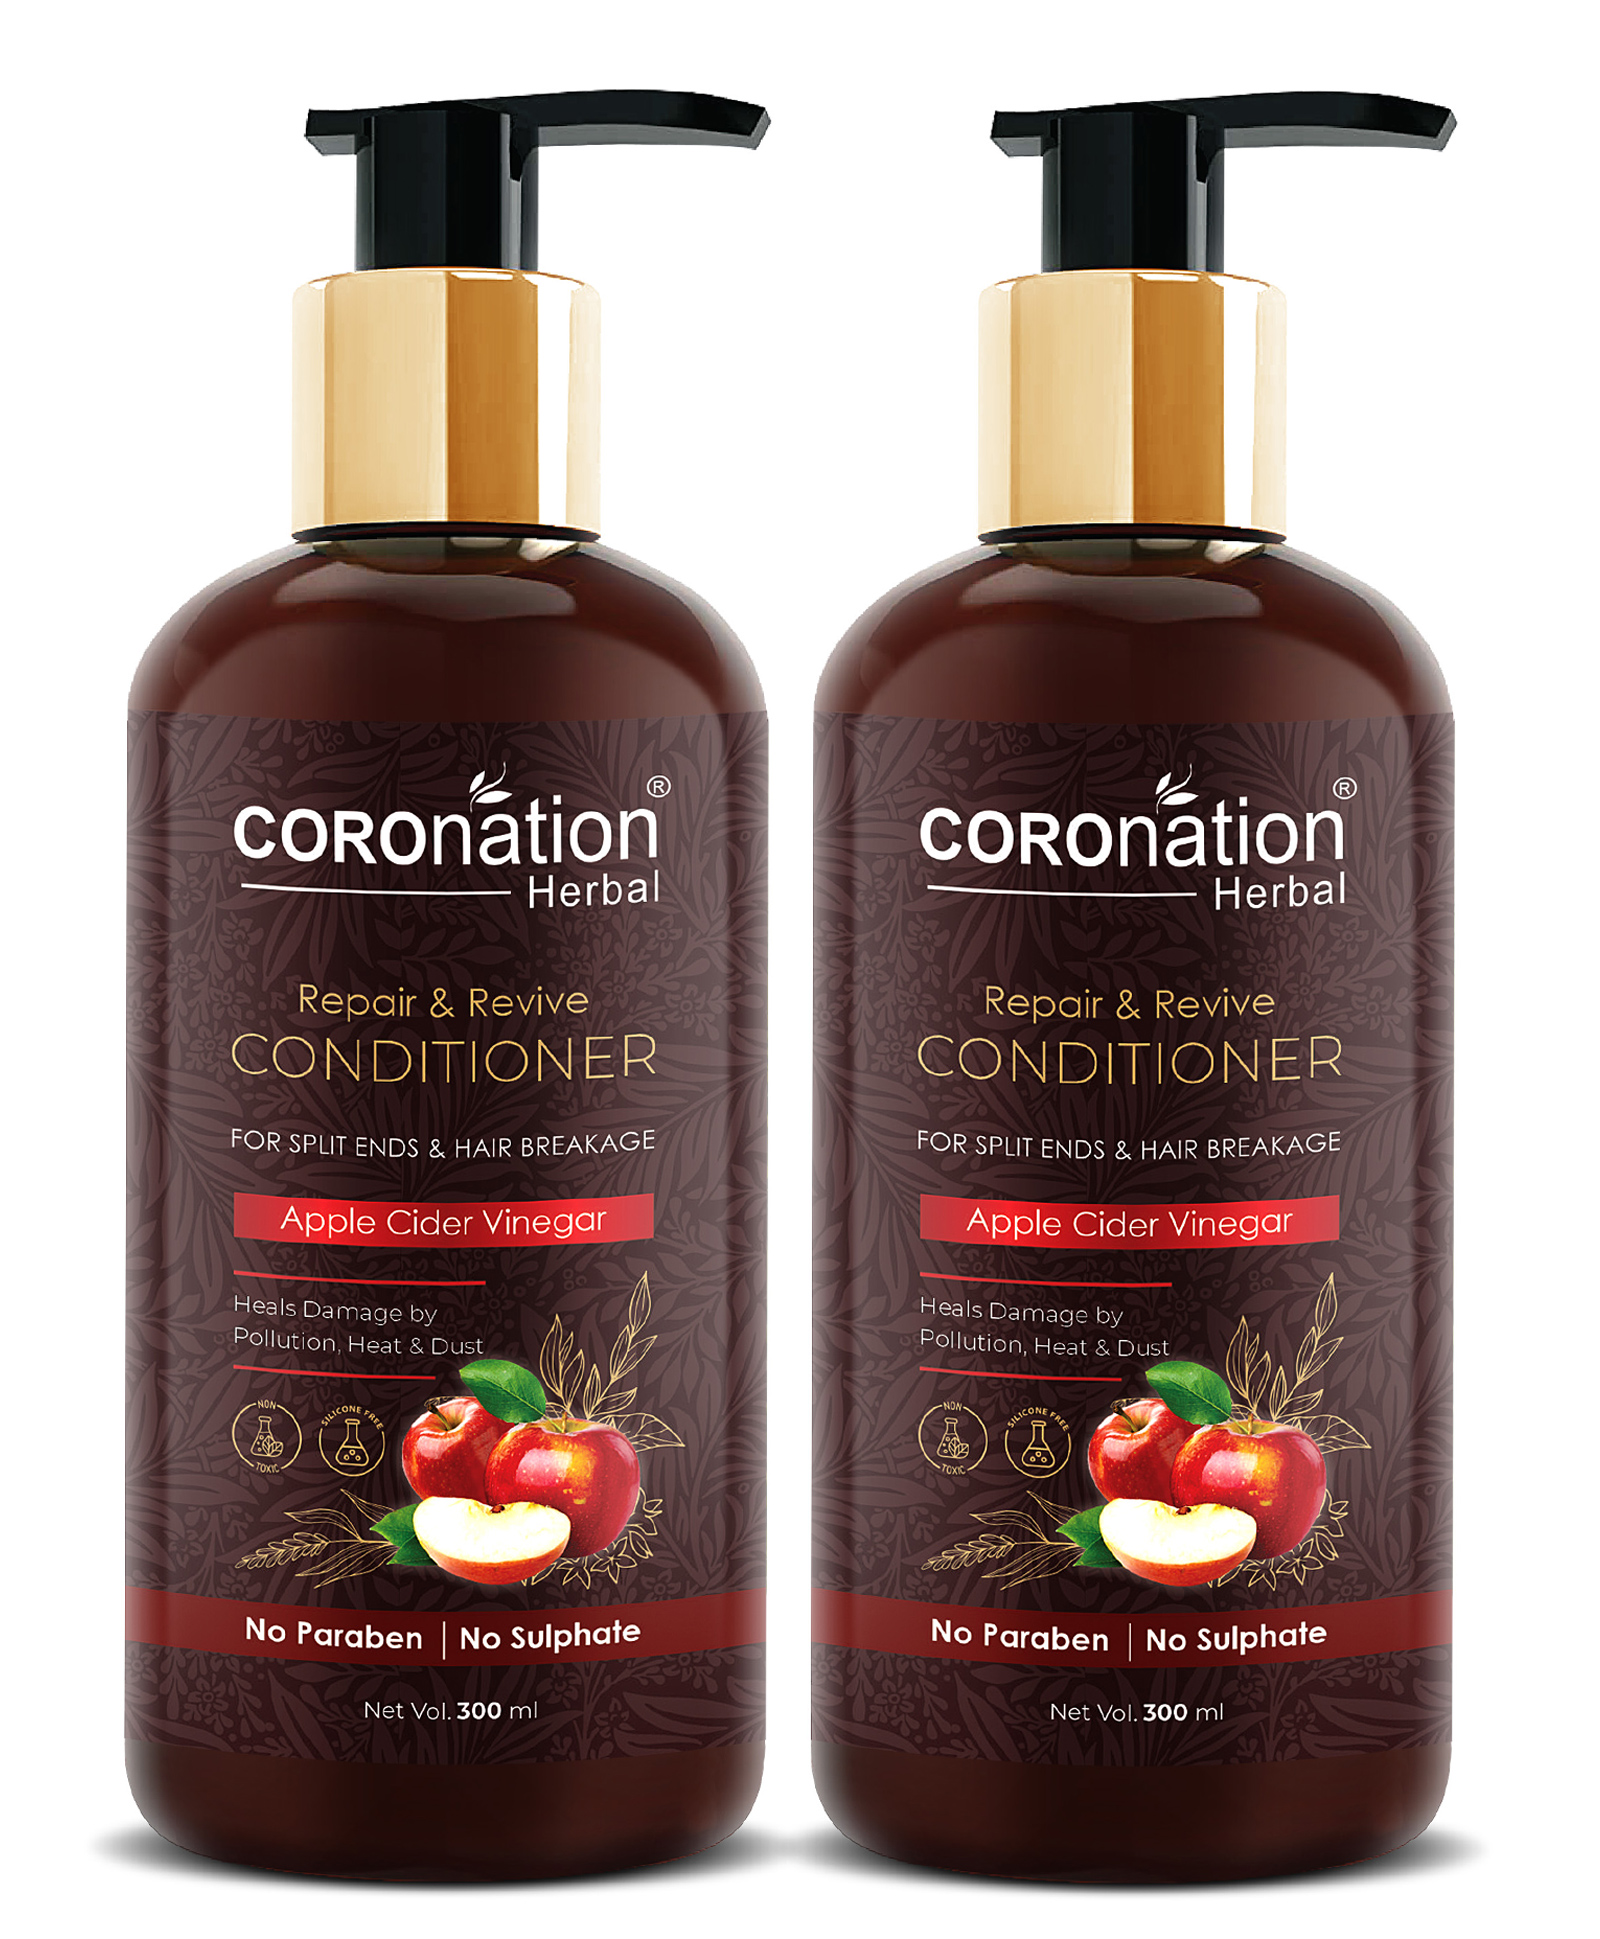 Coronation Herbal Apple Cider Vinegar Hair Conditioner Bottles Pack of 2 -  300 ml Each Online in India, Buy at Best Price from  - 10257879